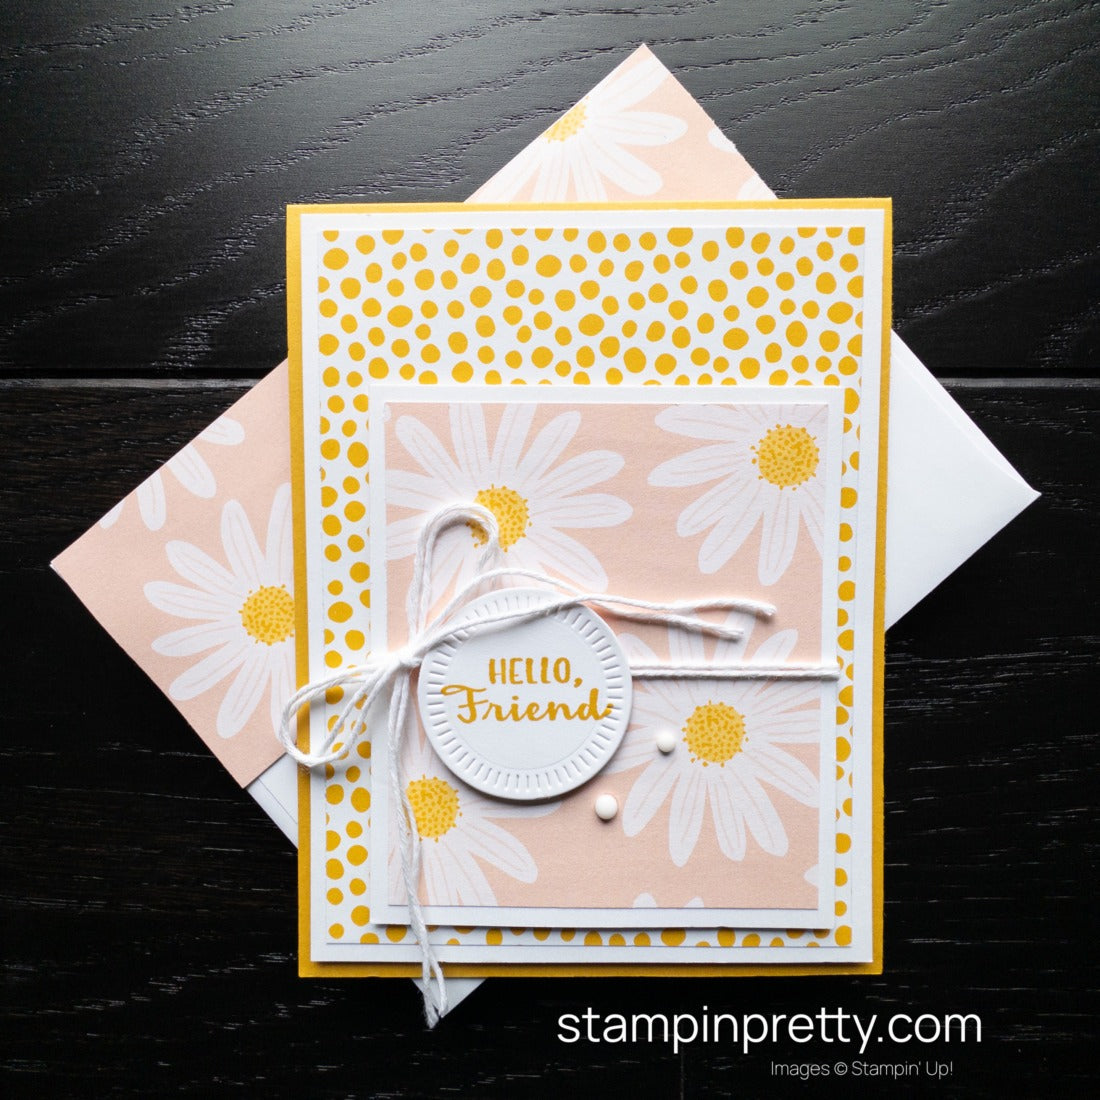 Stampin' Up! Delightfully Eclectic DSP